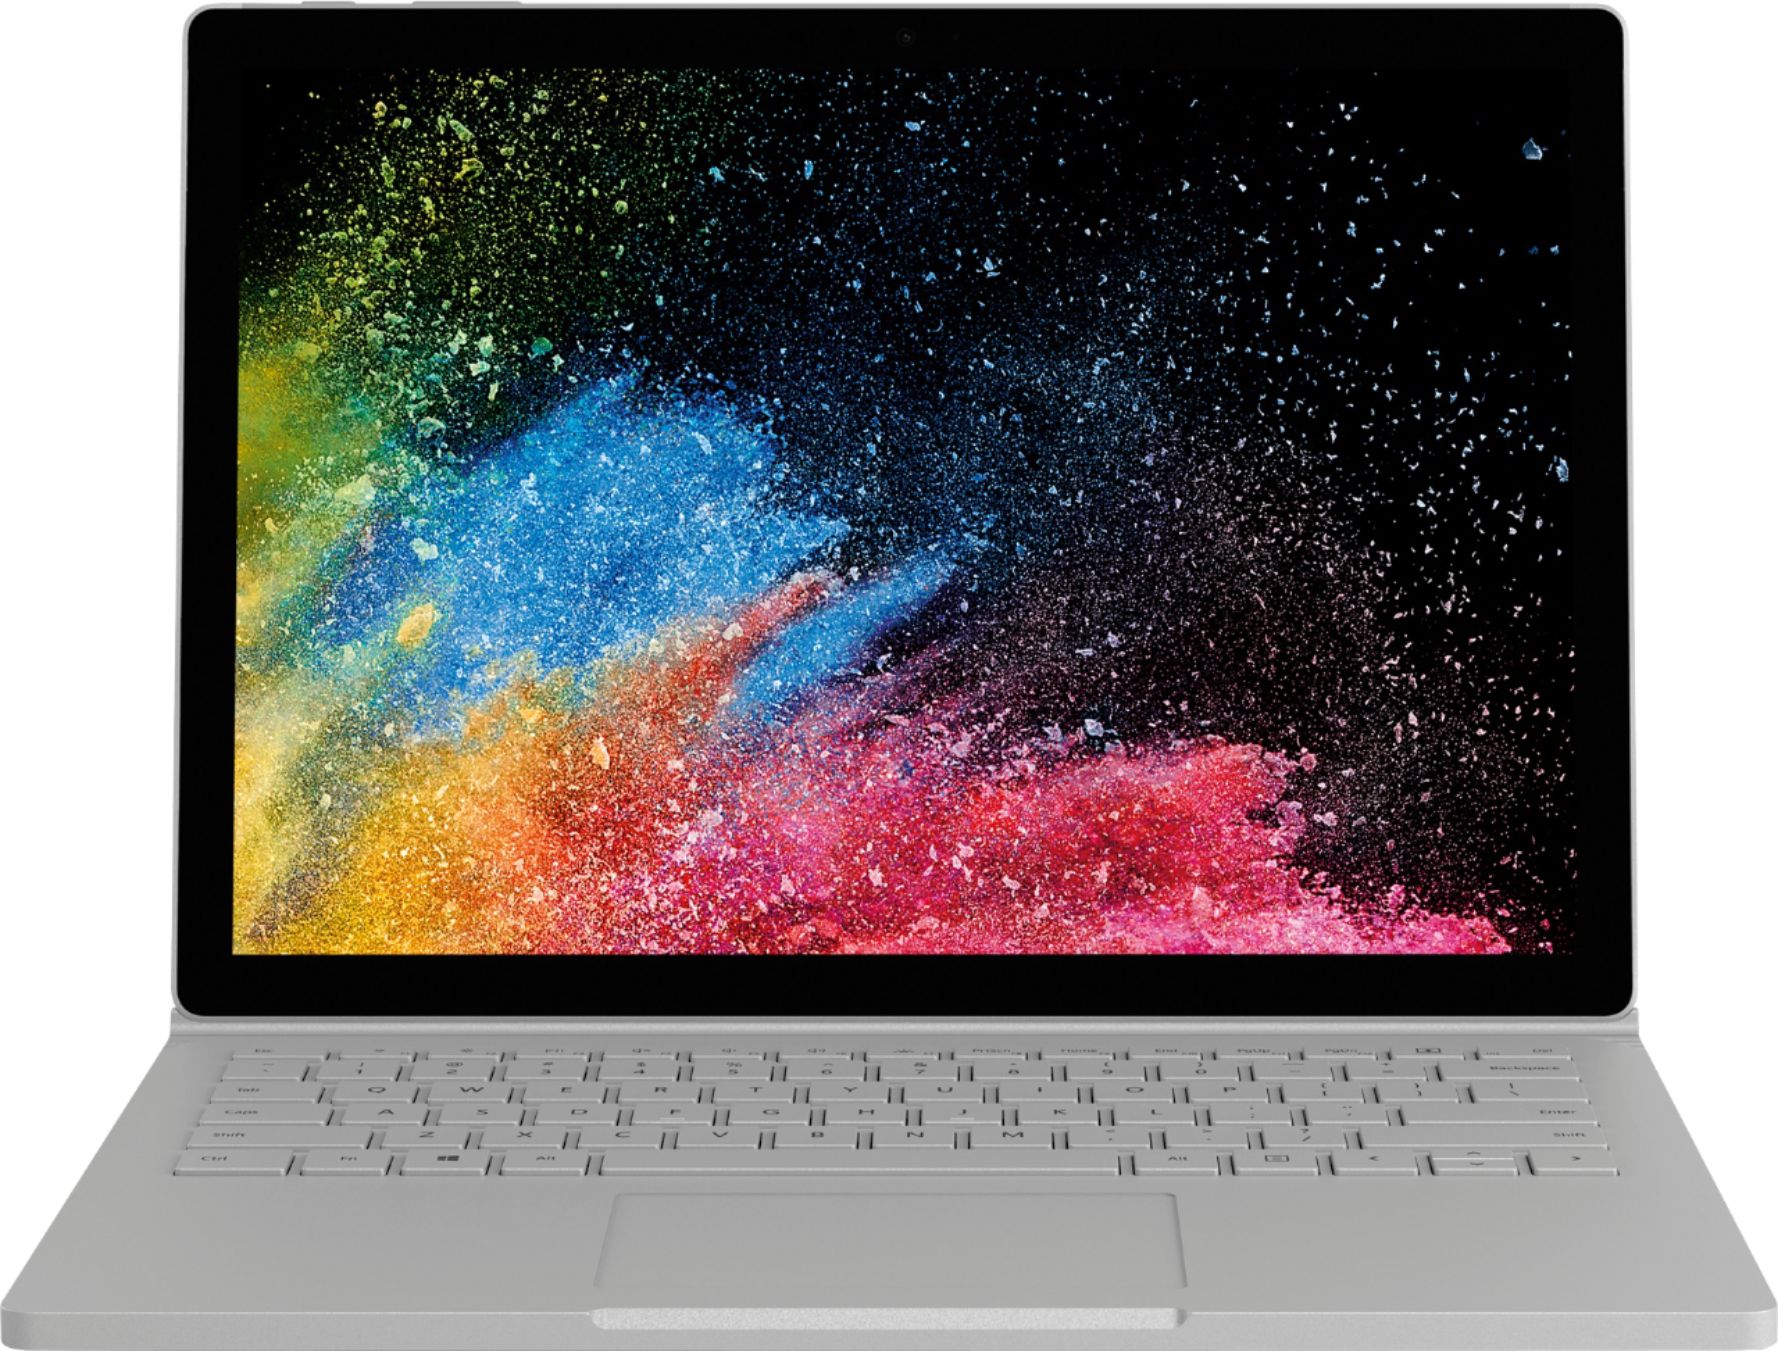 Angle View: Microsoft - Surface Book 3 15" Touch-Screen PixelSense - 2-in-1 Laptop - Intel Core i7 - 32GB Memory - 2TB SSD - Platinum